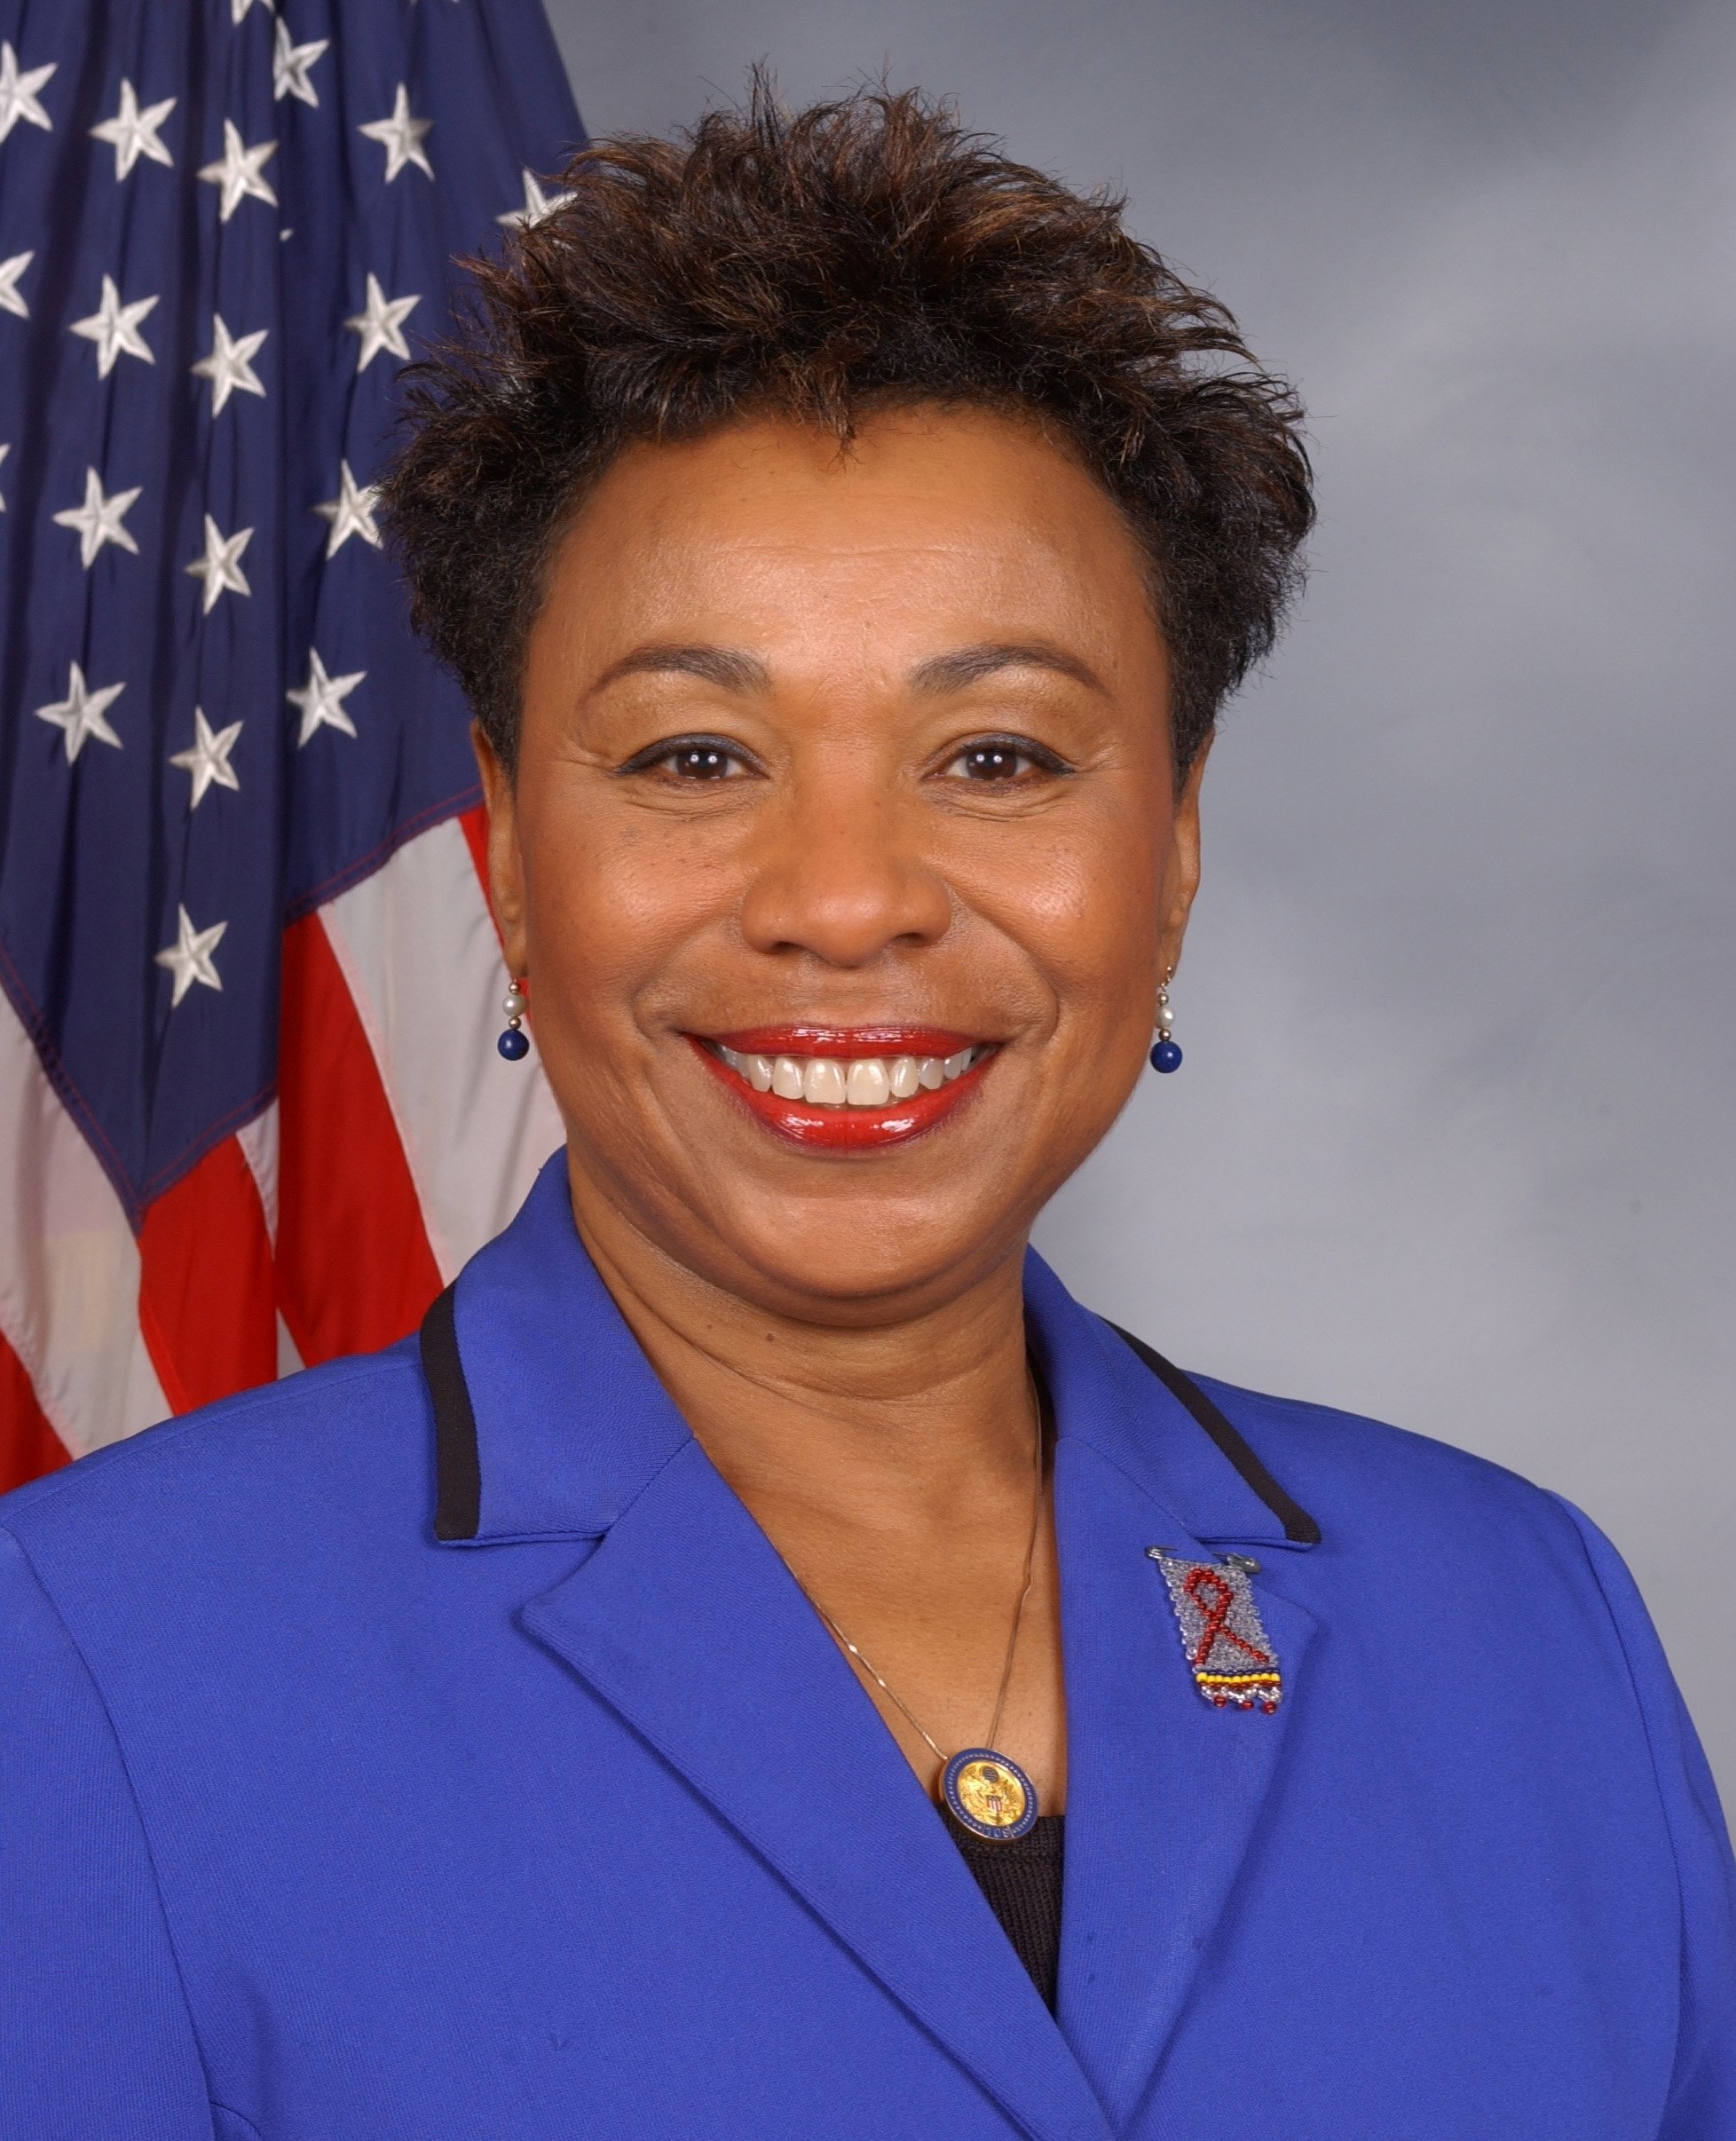 Barbara Lee - A Seat at the Table